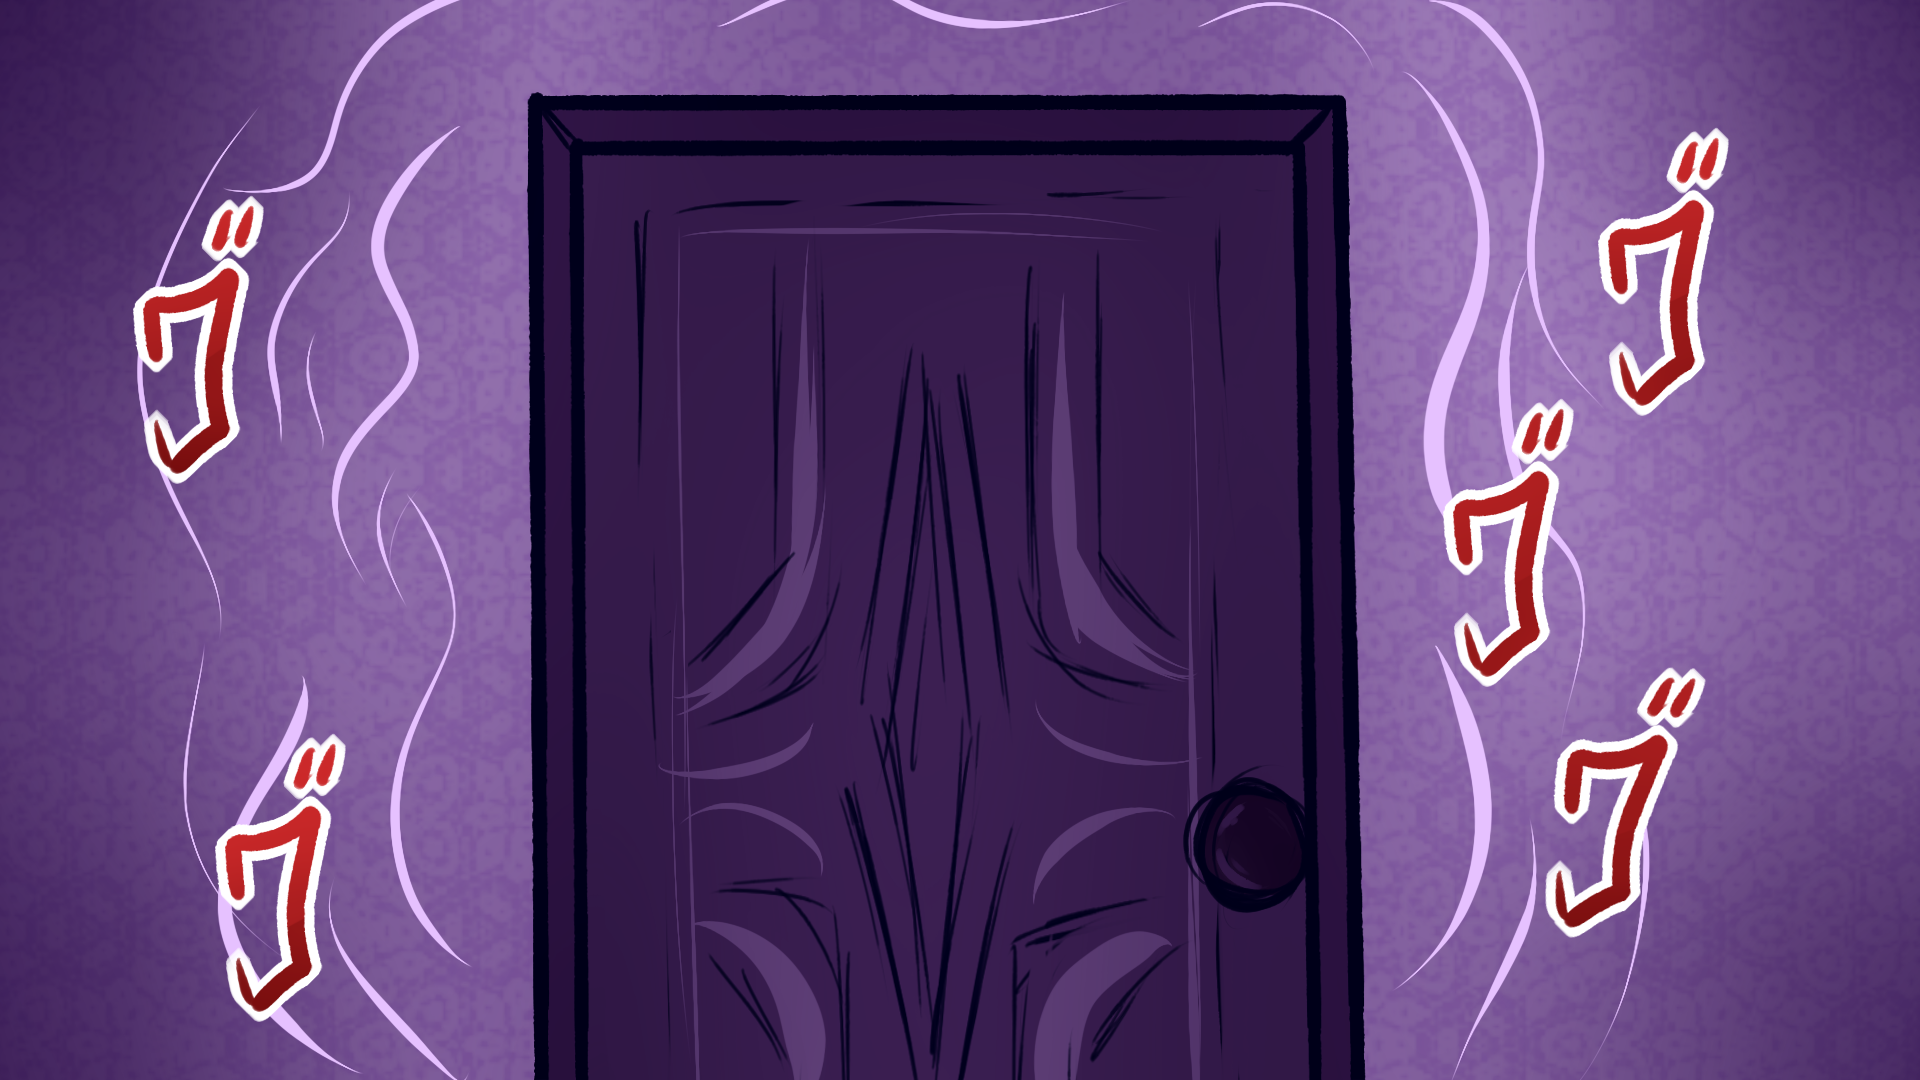 A picture of the door with the "menacing" Japanese hiragana emanating from around the door, similar to JoJo's Bizarre Adventure.